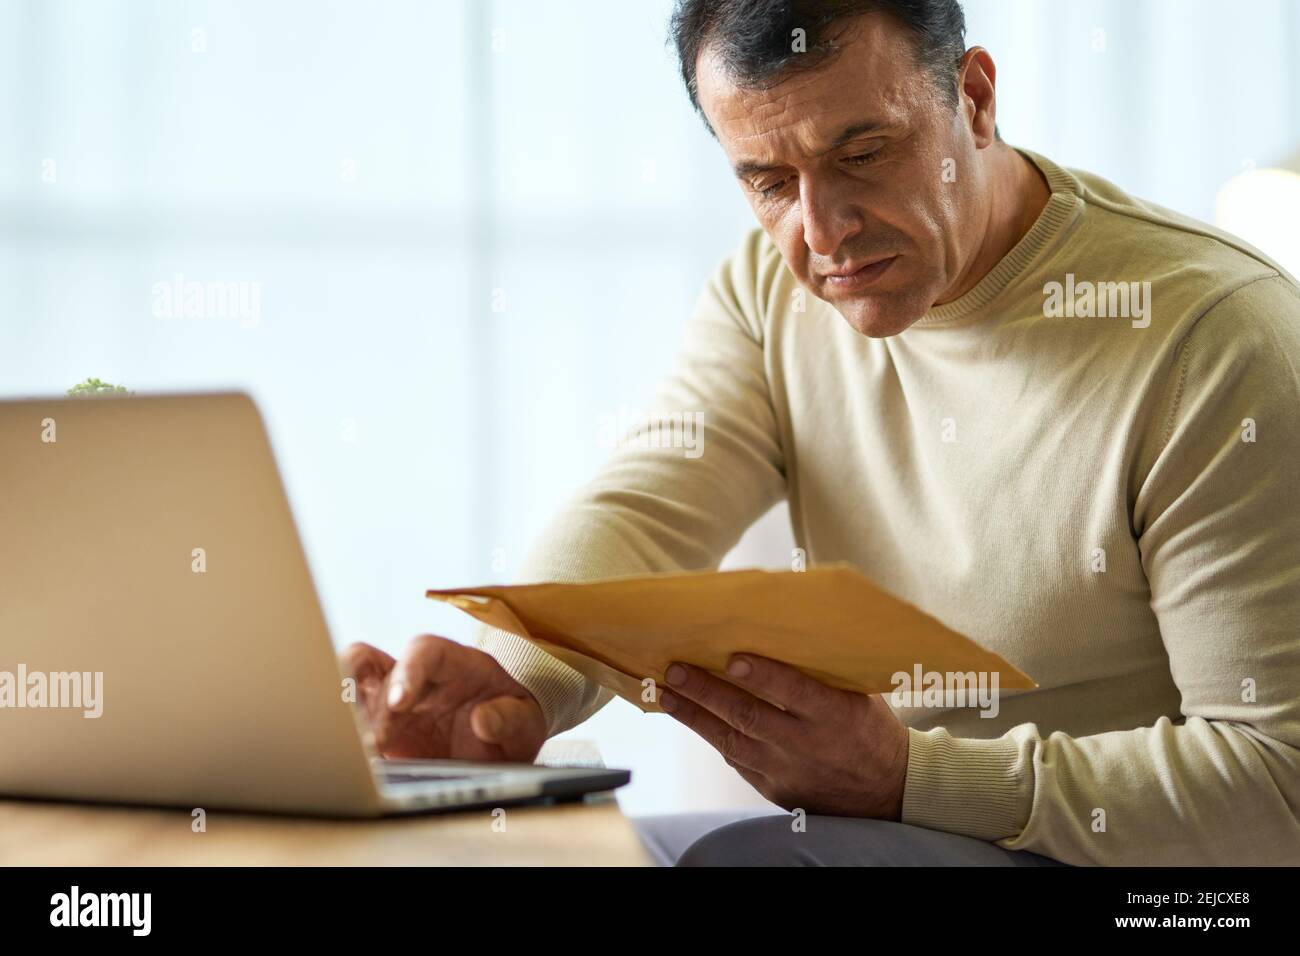 Portrait of busy latin middle aged businessman looking at the envelope, using laptop while working from home. Telework, business concept Stock Photo